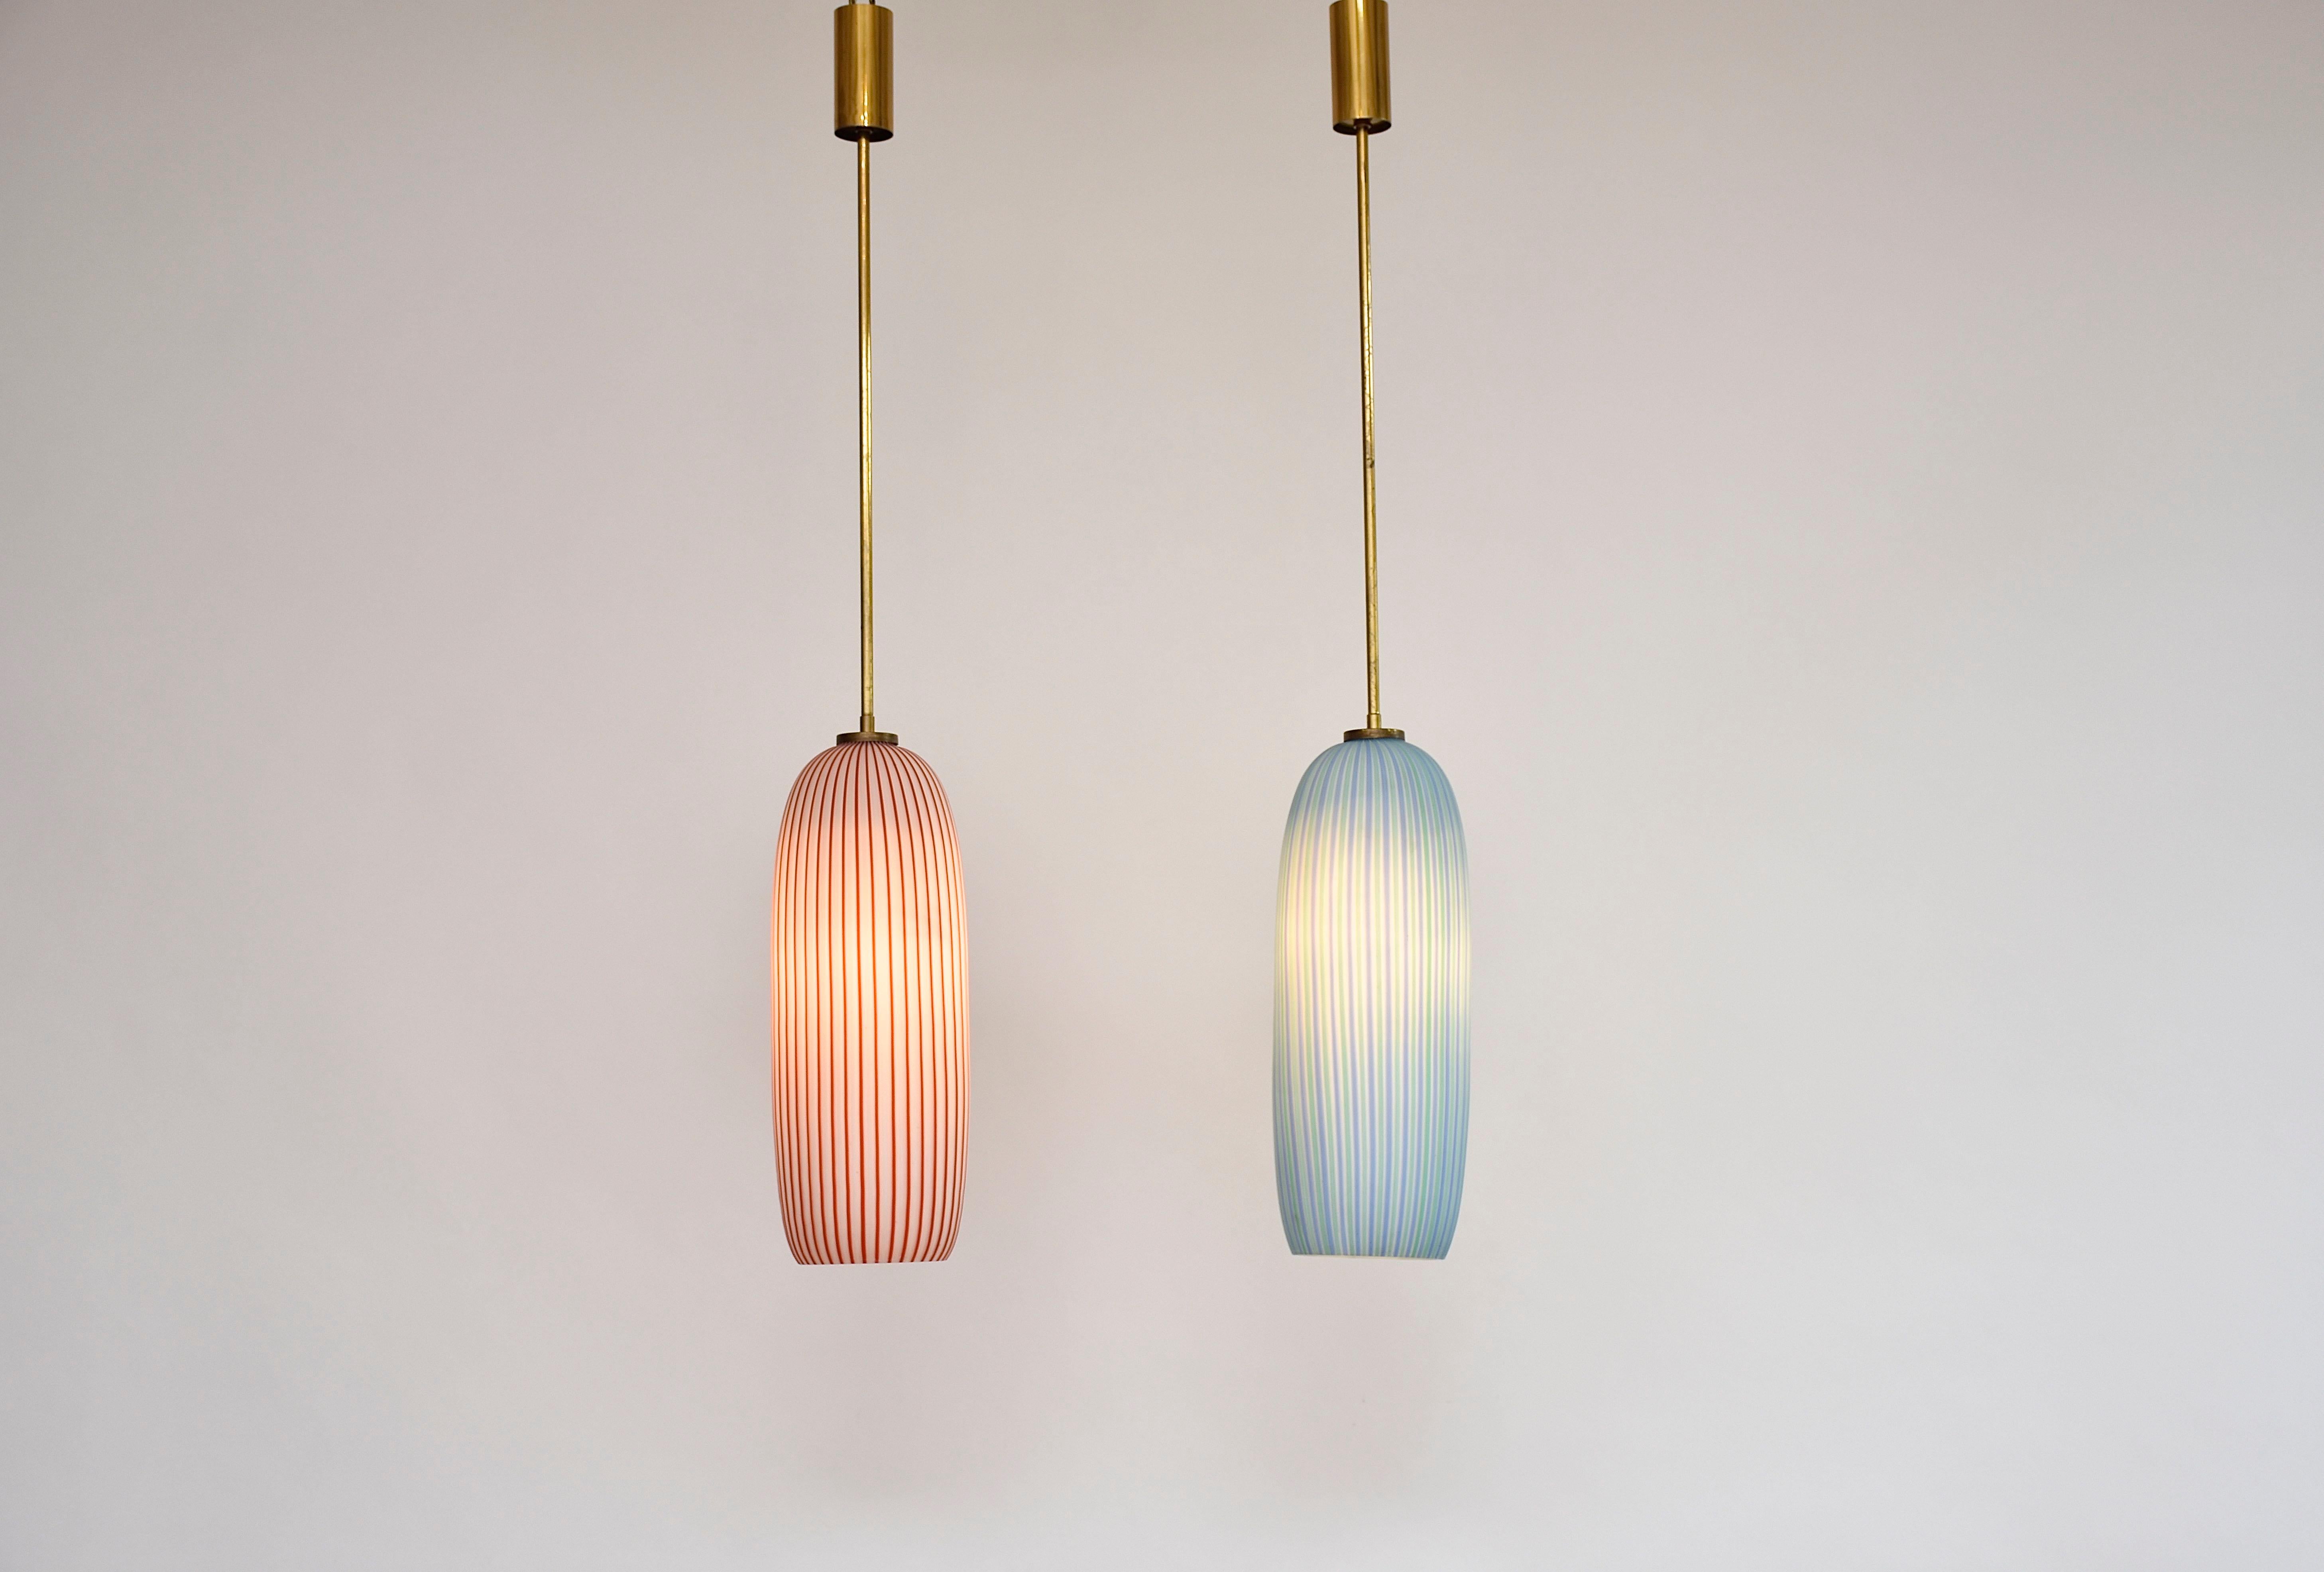 A beautiful pair of 2 mid-century lamps in two cheerful colors.
Hand blown cylindrical Murano pendants with striped pattern. 
Beautiful quality!
Brass frame and ceiling cover.
